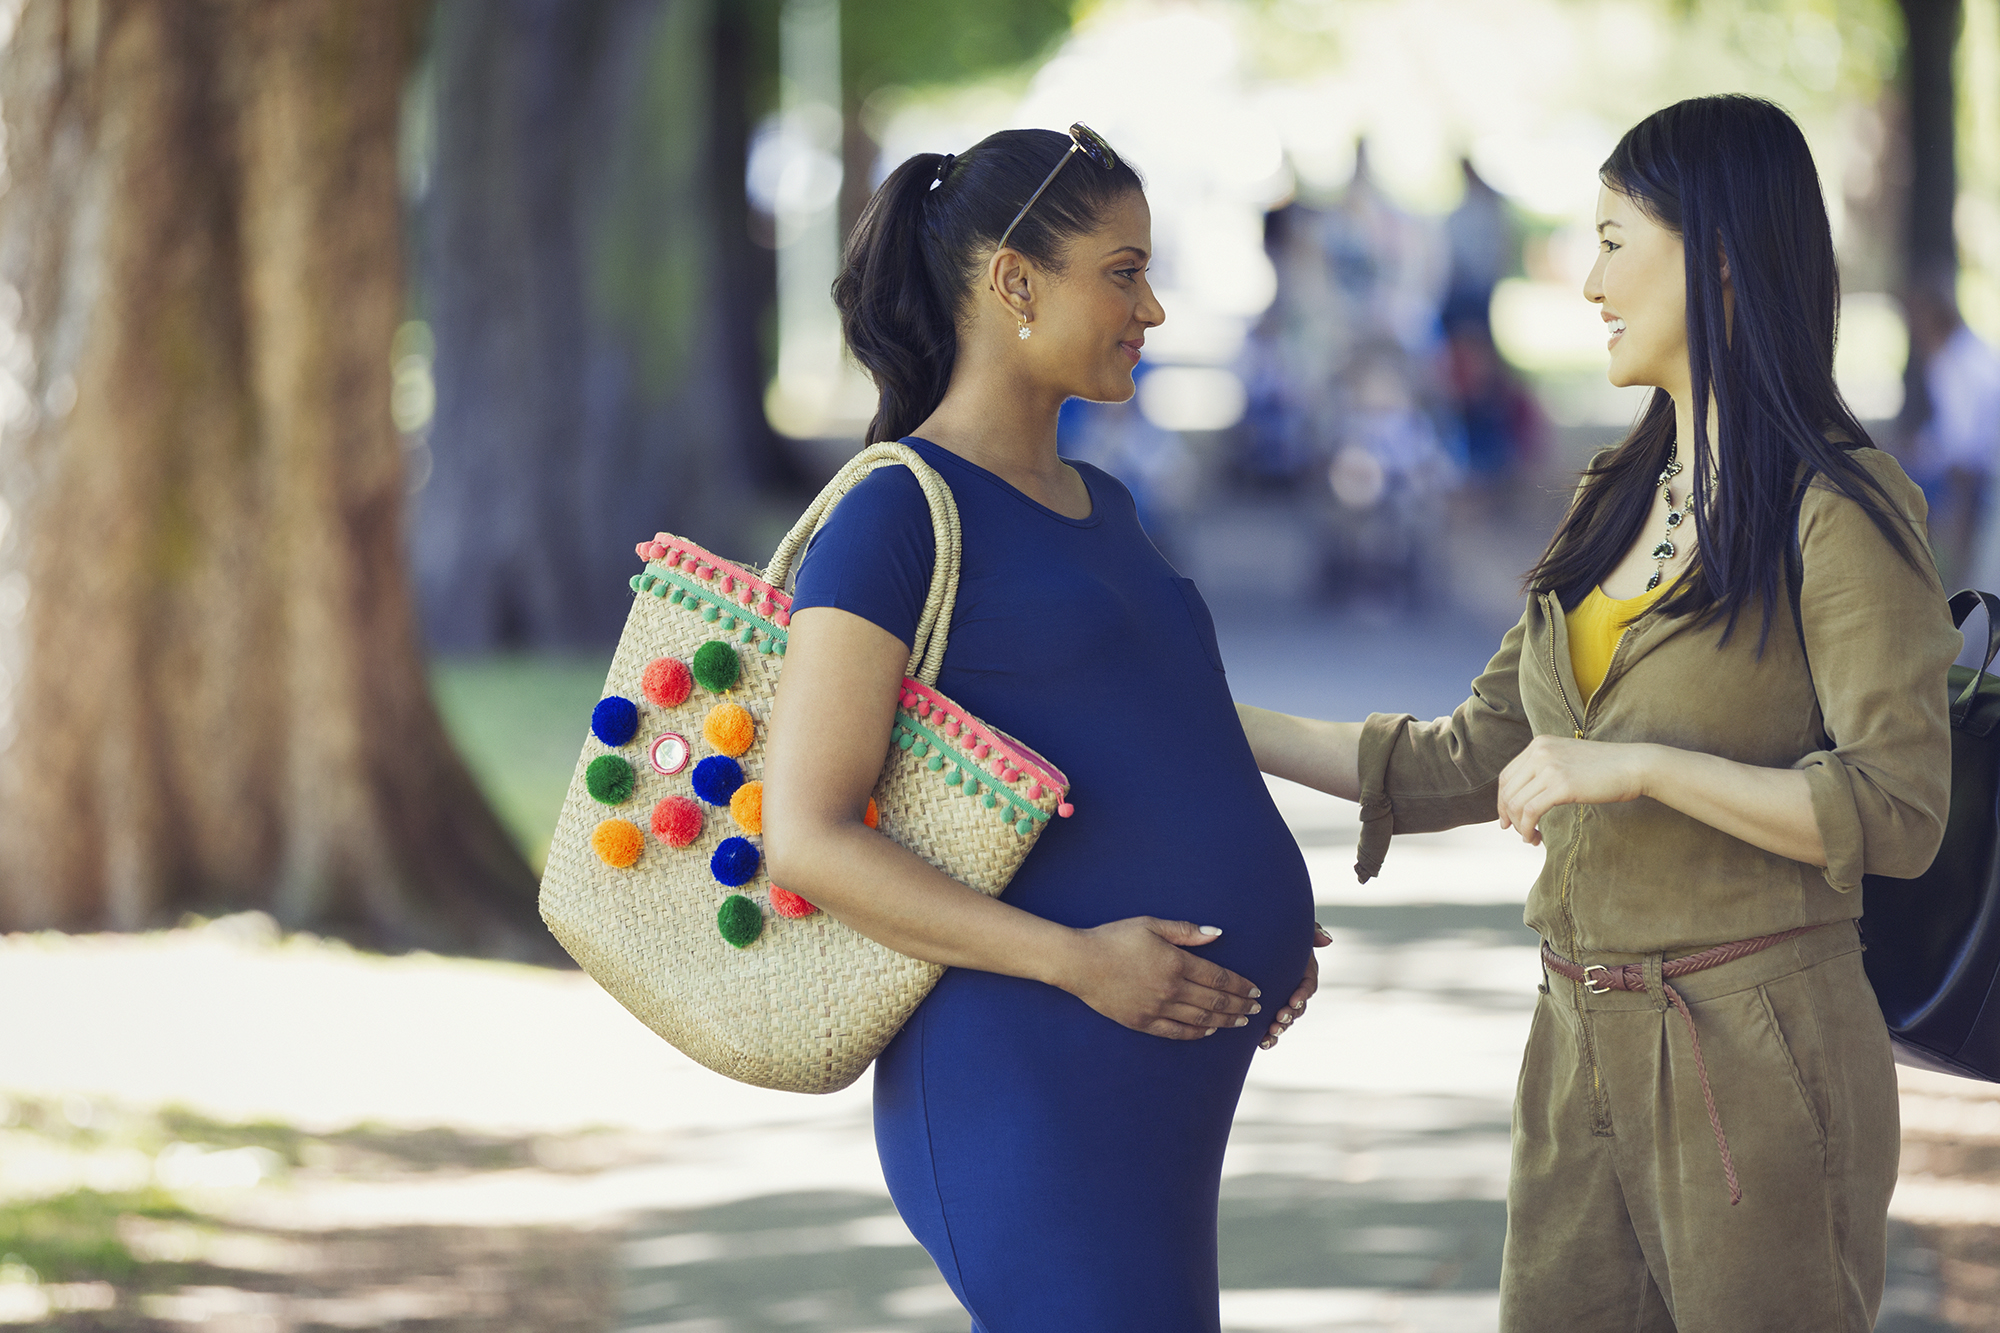 A pregnant woman in the park